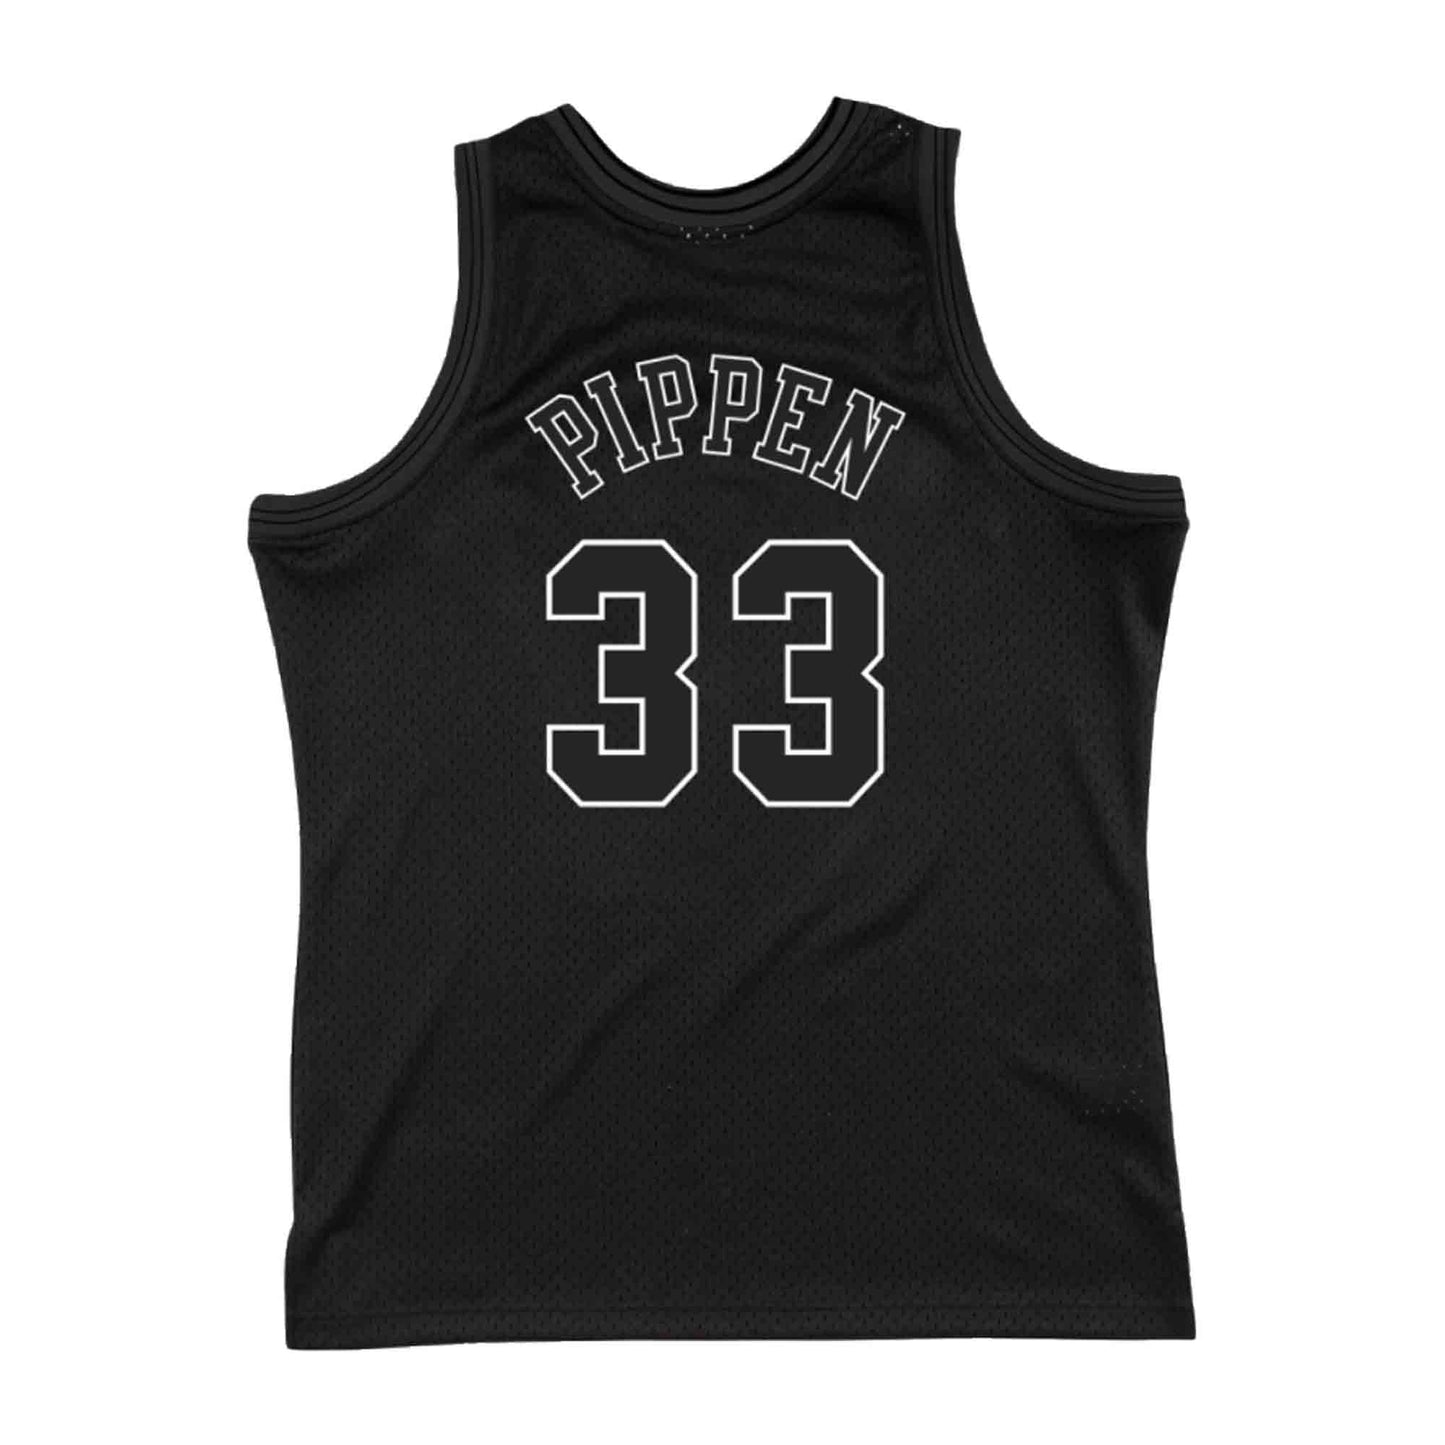 black and white jersey nba